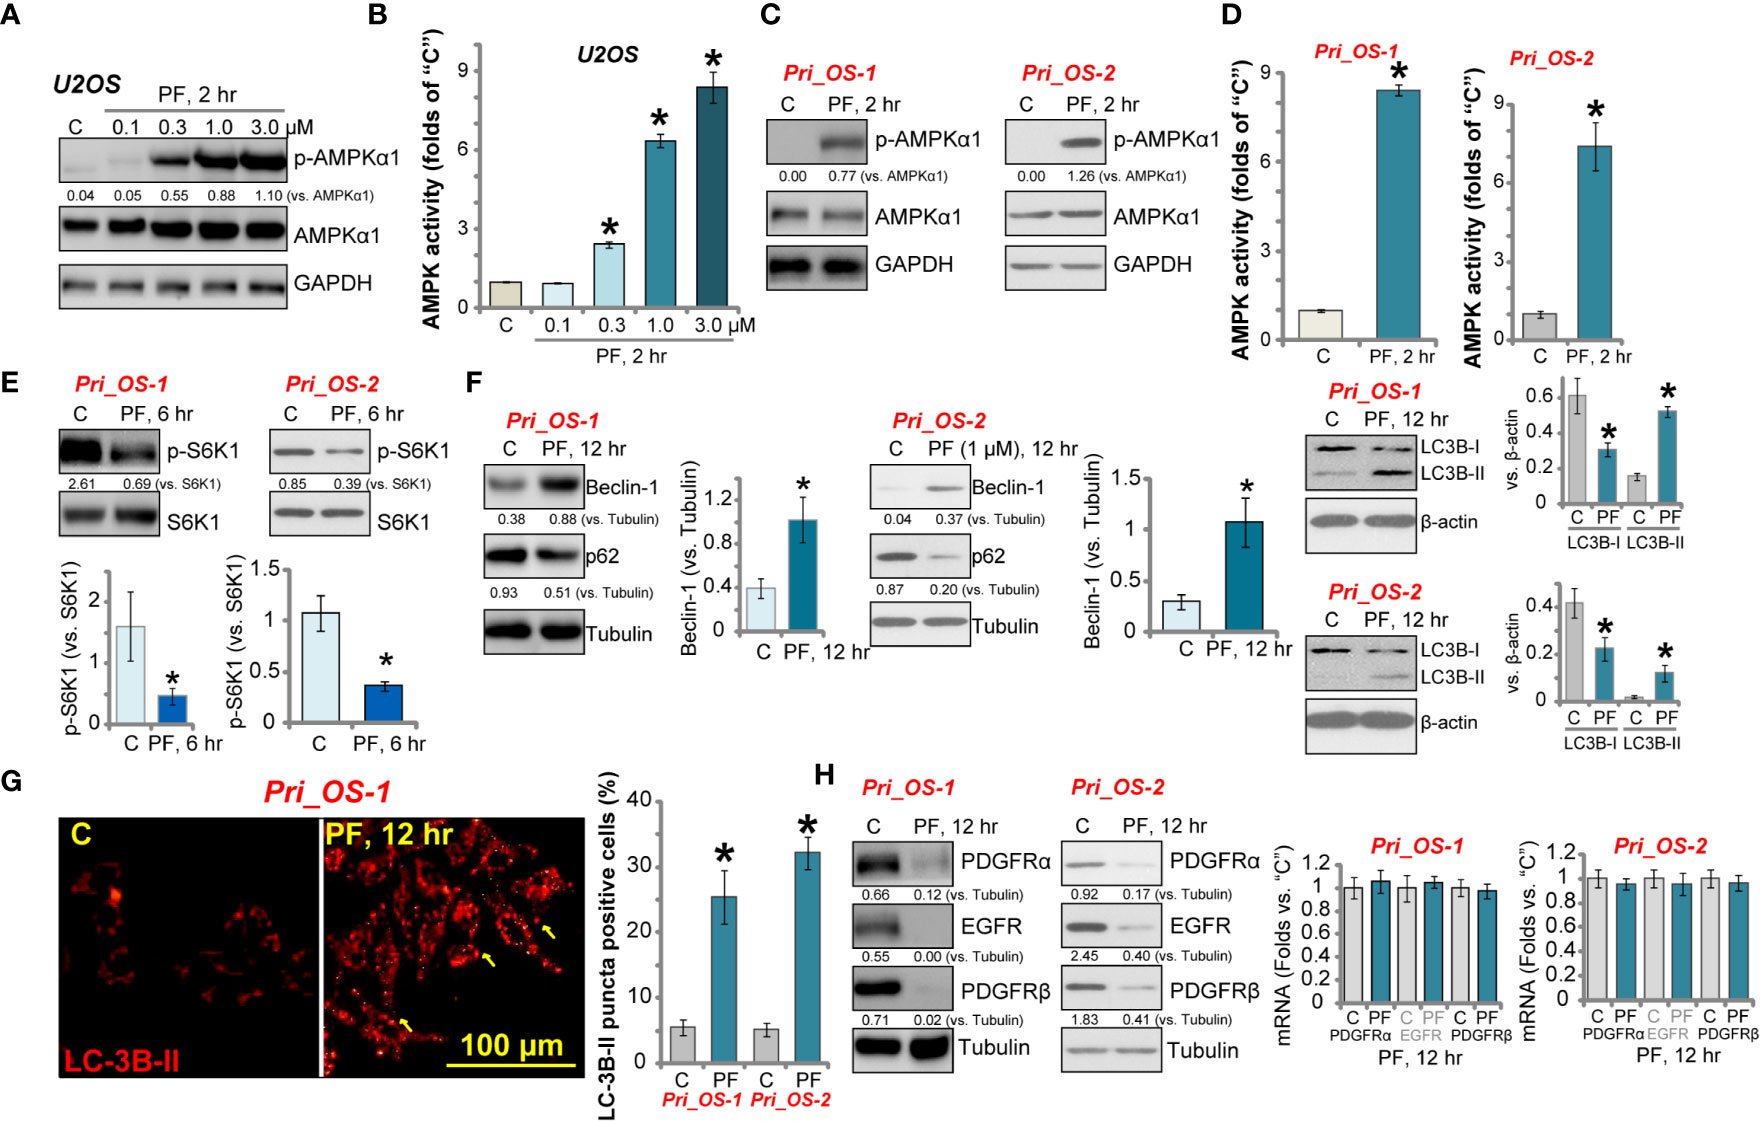 Frontiers | PF-06409577 Activates AMPK Signaling and Inhibits 